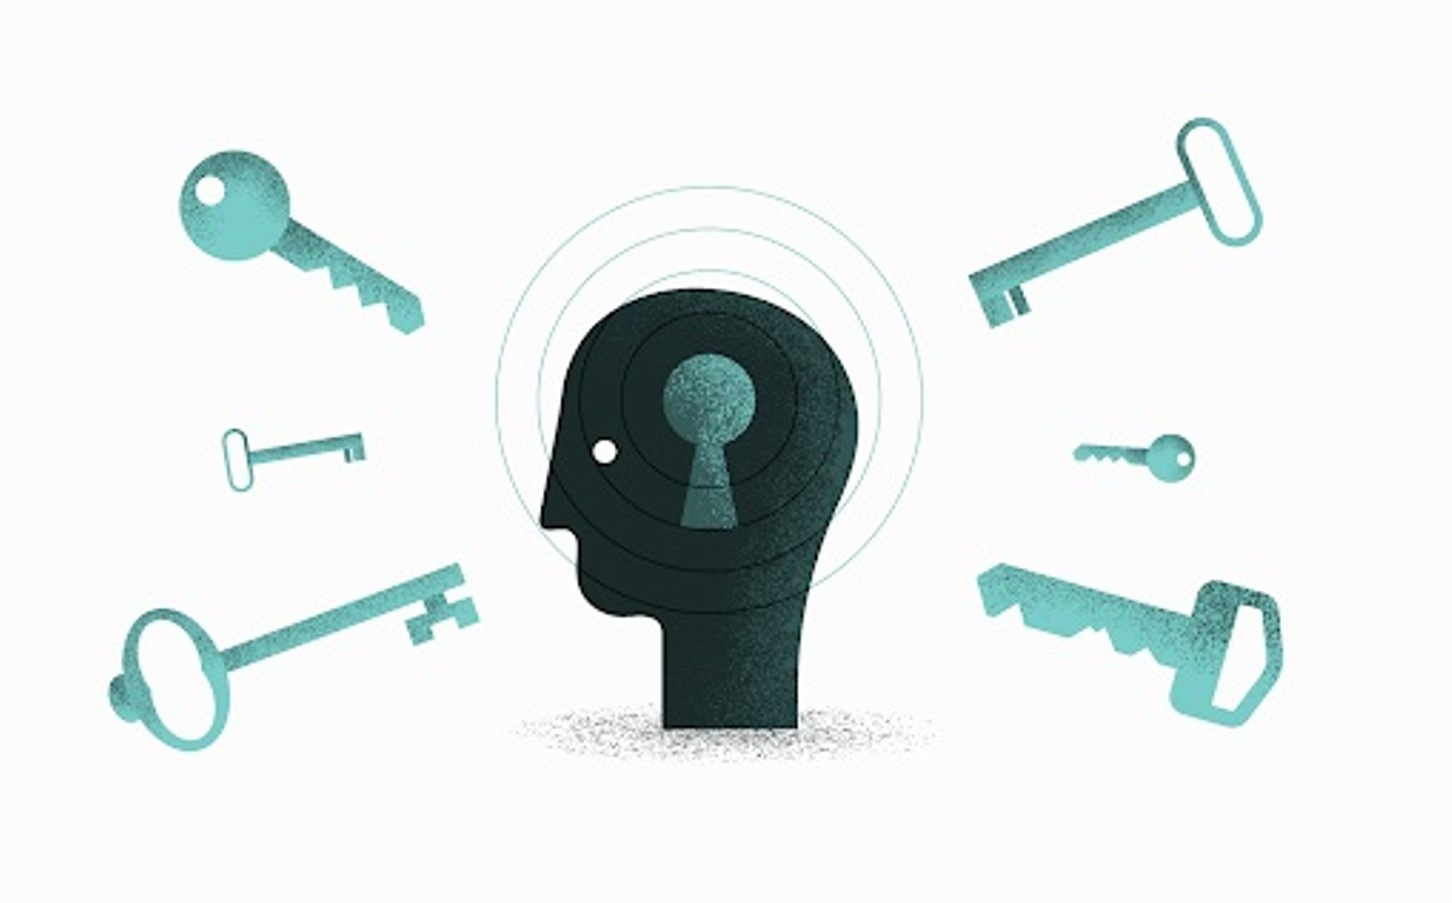 Illustration of a human head silhouette in profile with a keyhole on the forehead, surrounded by various floating keys.